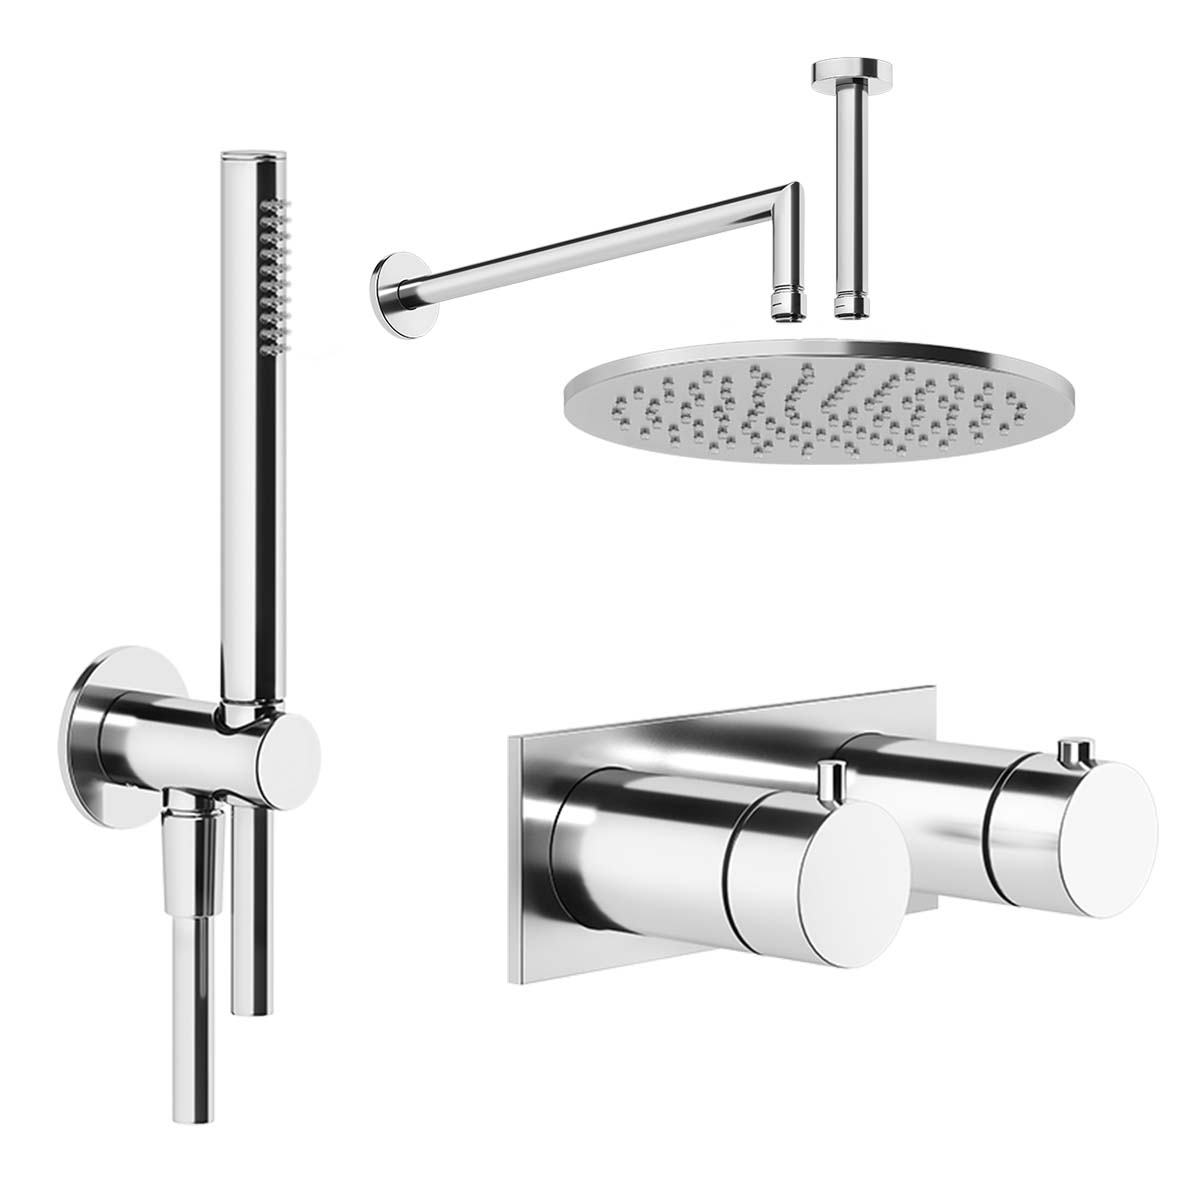 Gessi Anello Dual Outlet Thermostatic Shower Valve with Pencil Shower Handset and Overhead Chrome